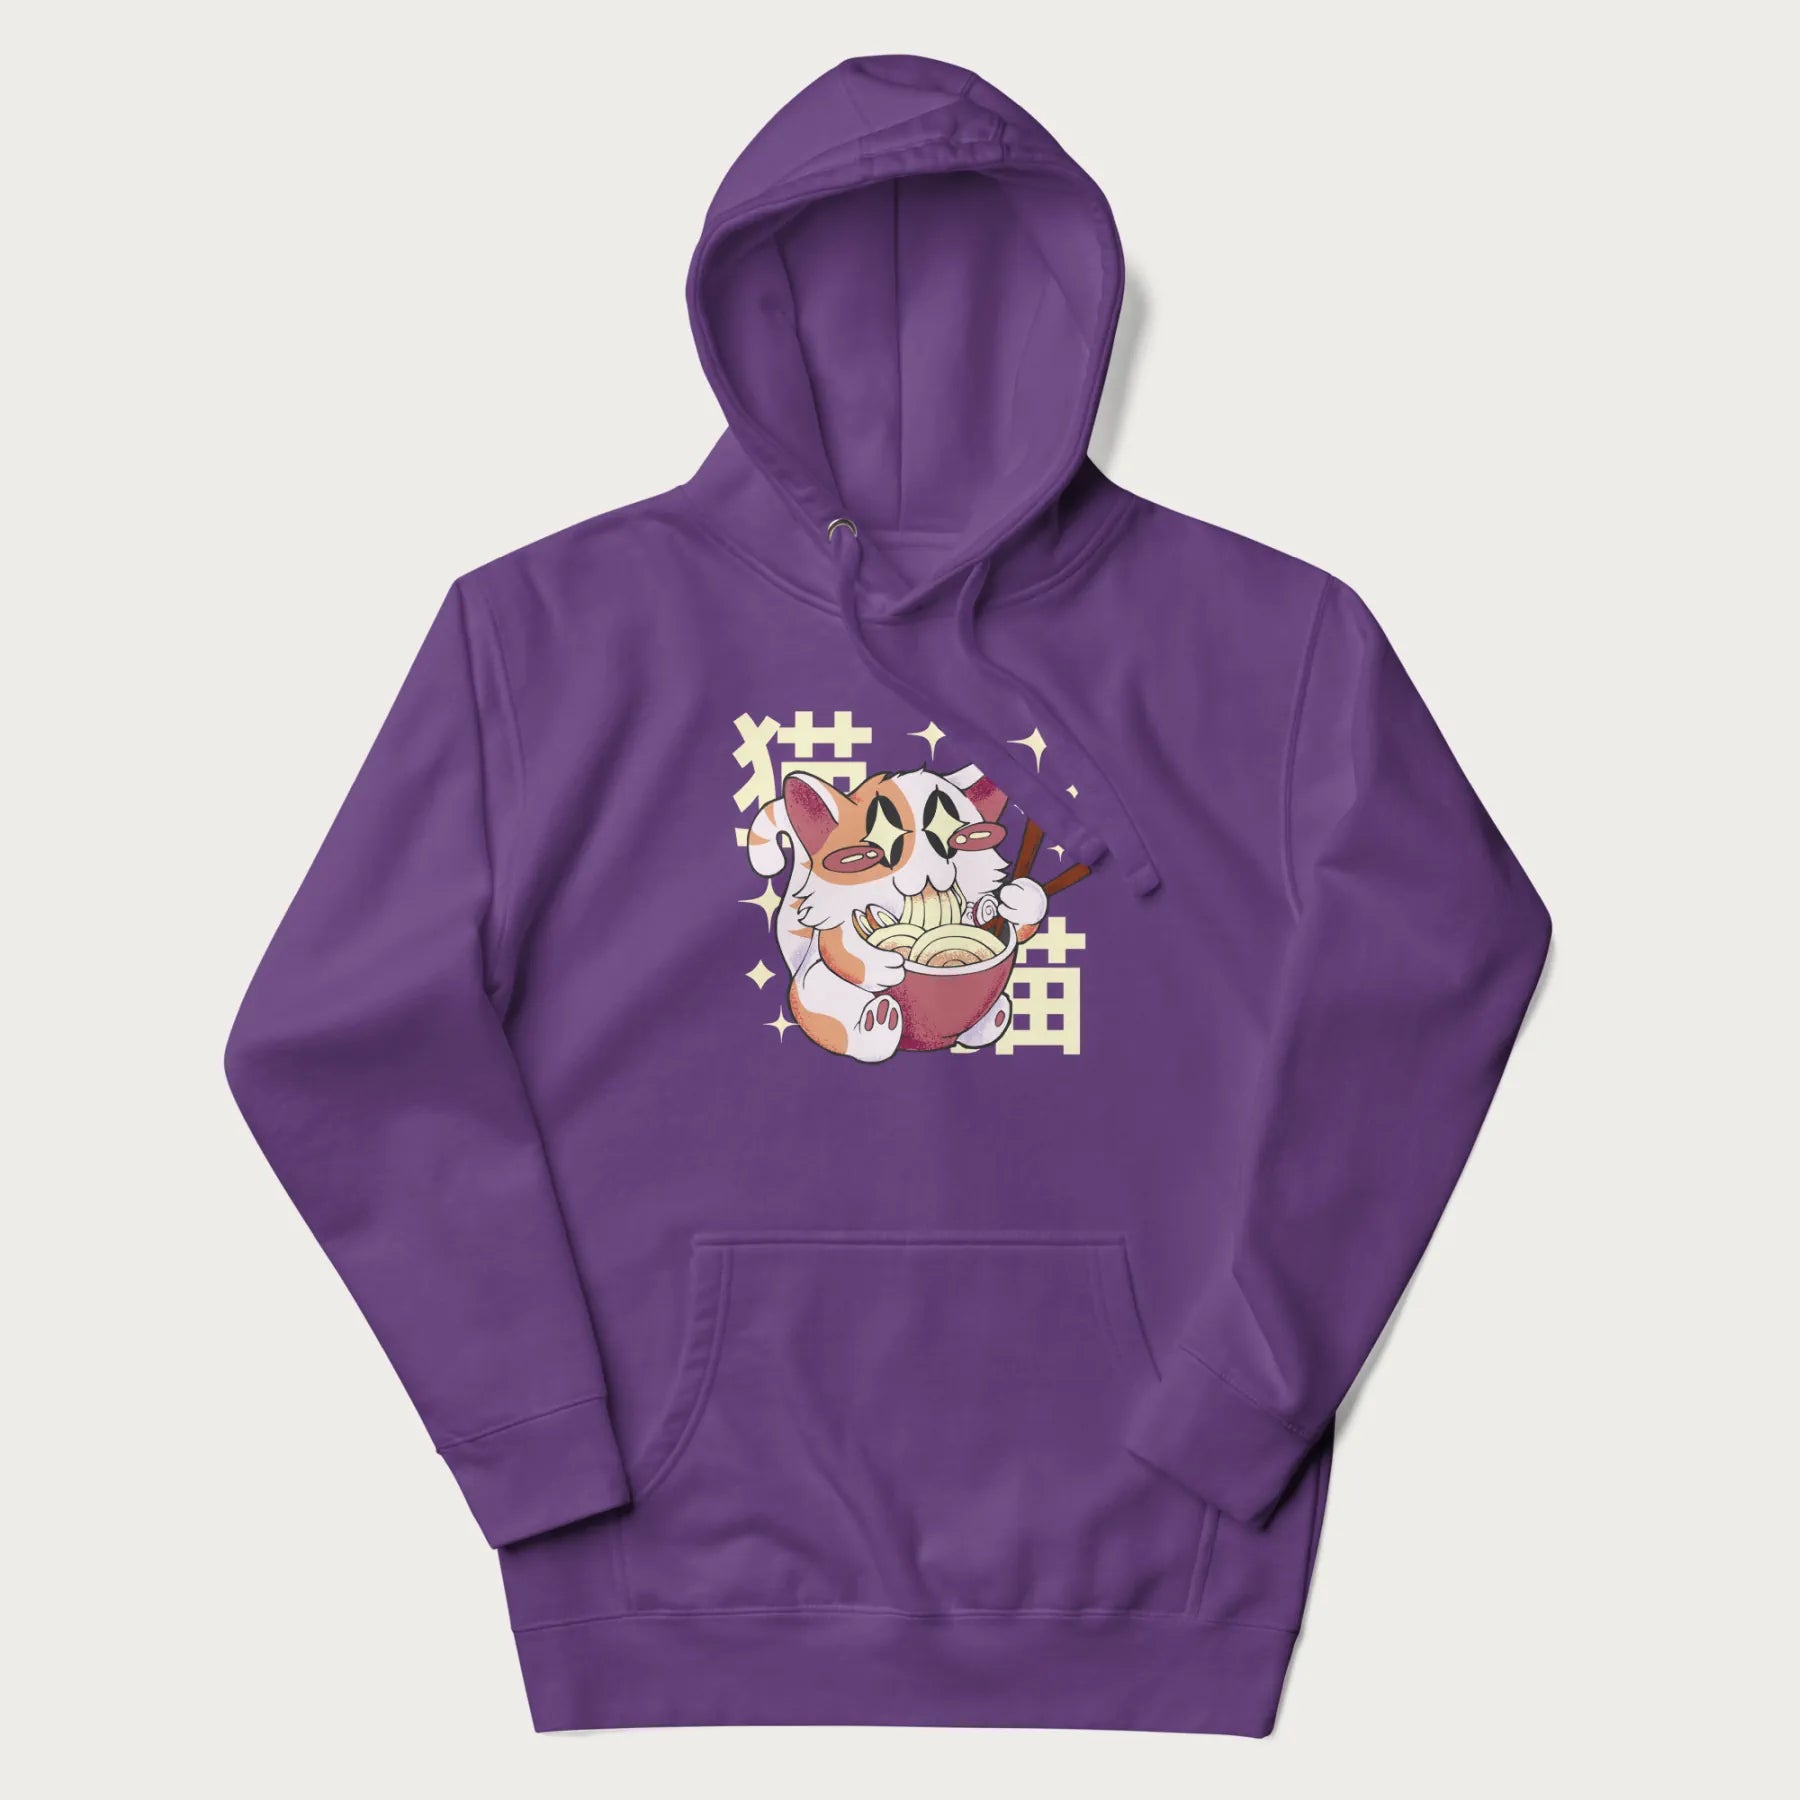 Purple hoodie with Japanese graphic of a cat eating ramen with Japanese text '猫' in the background.